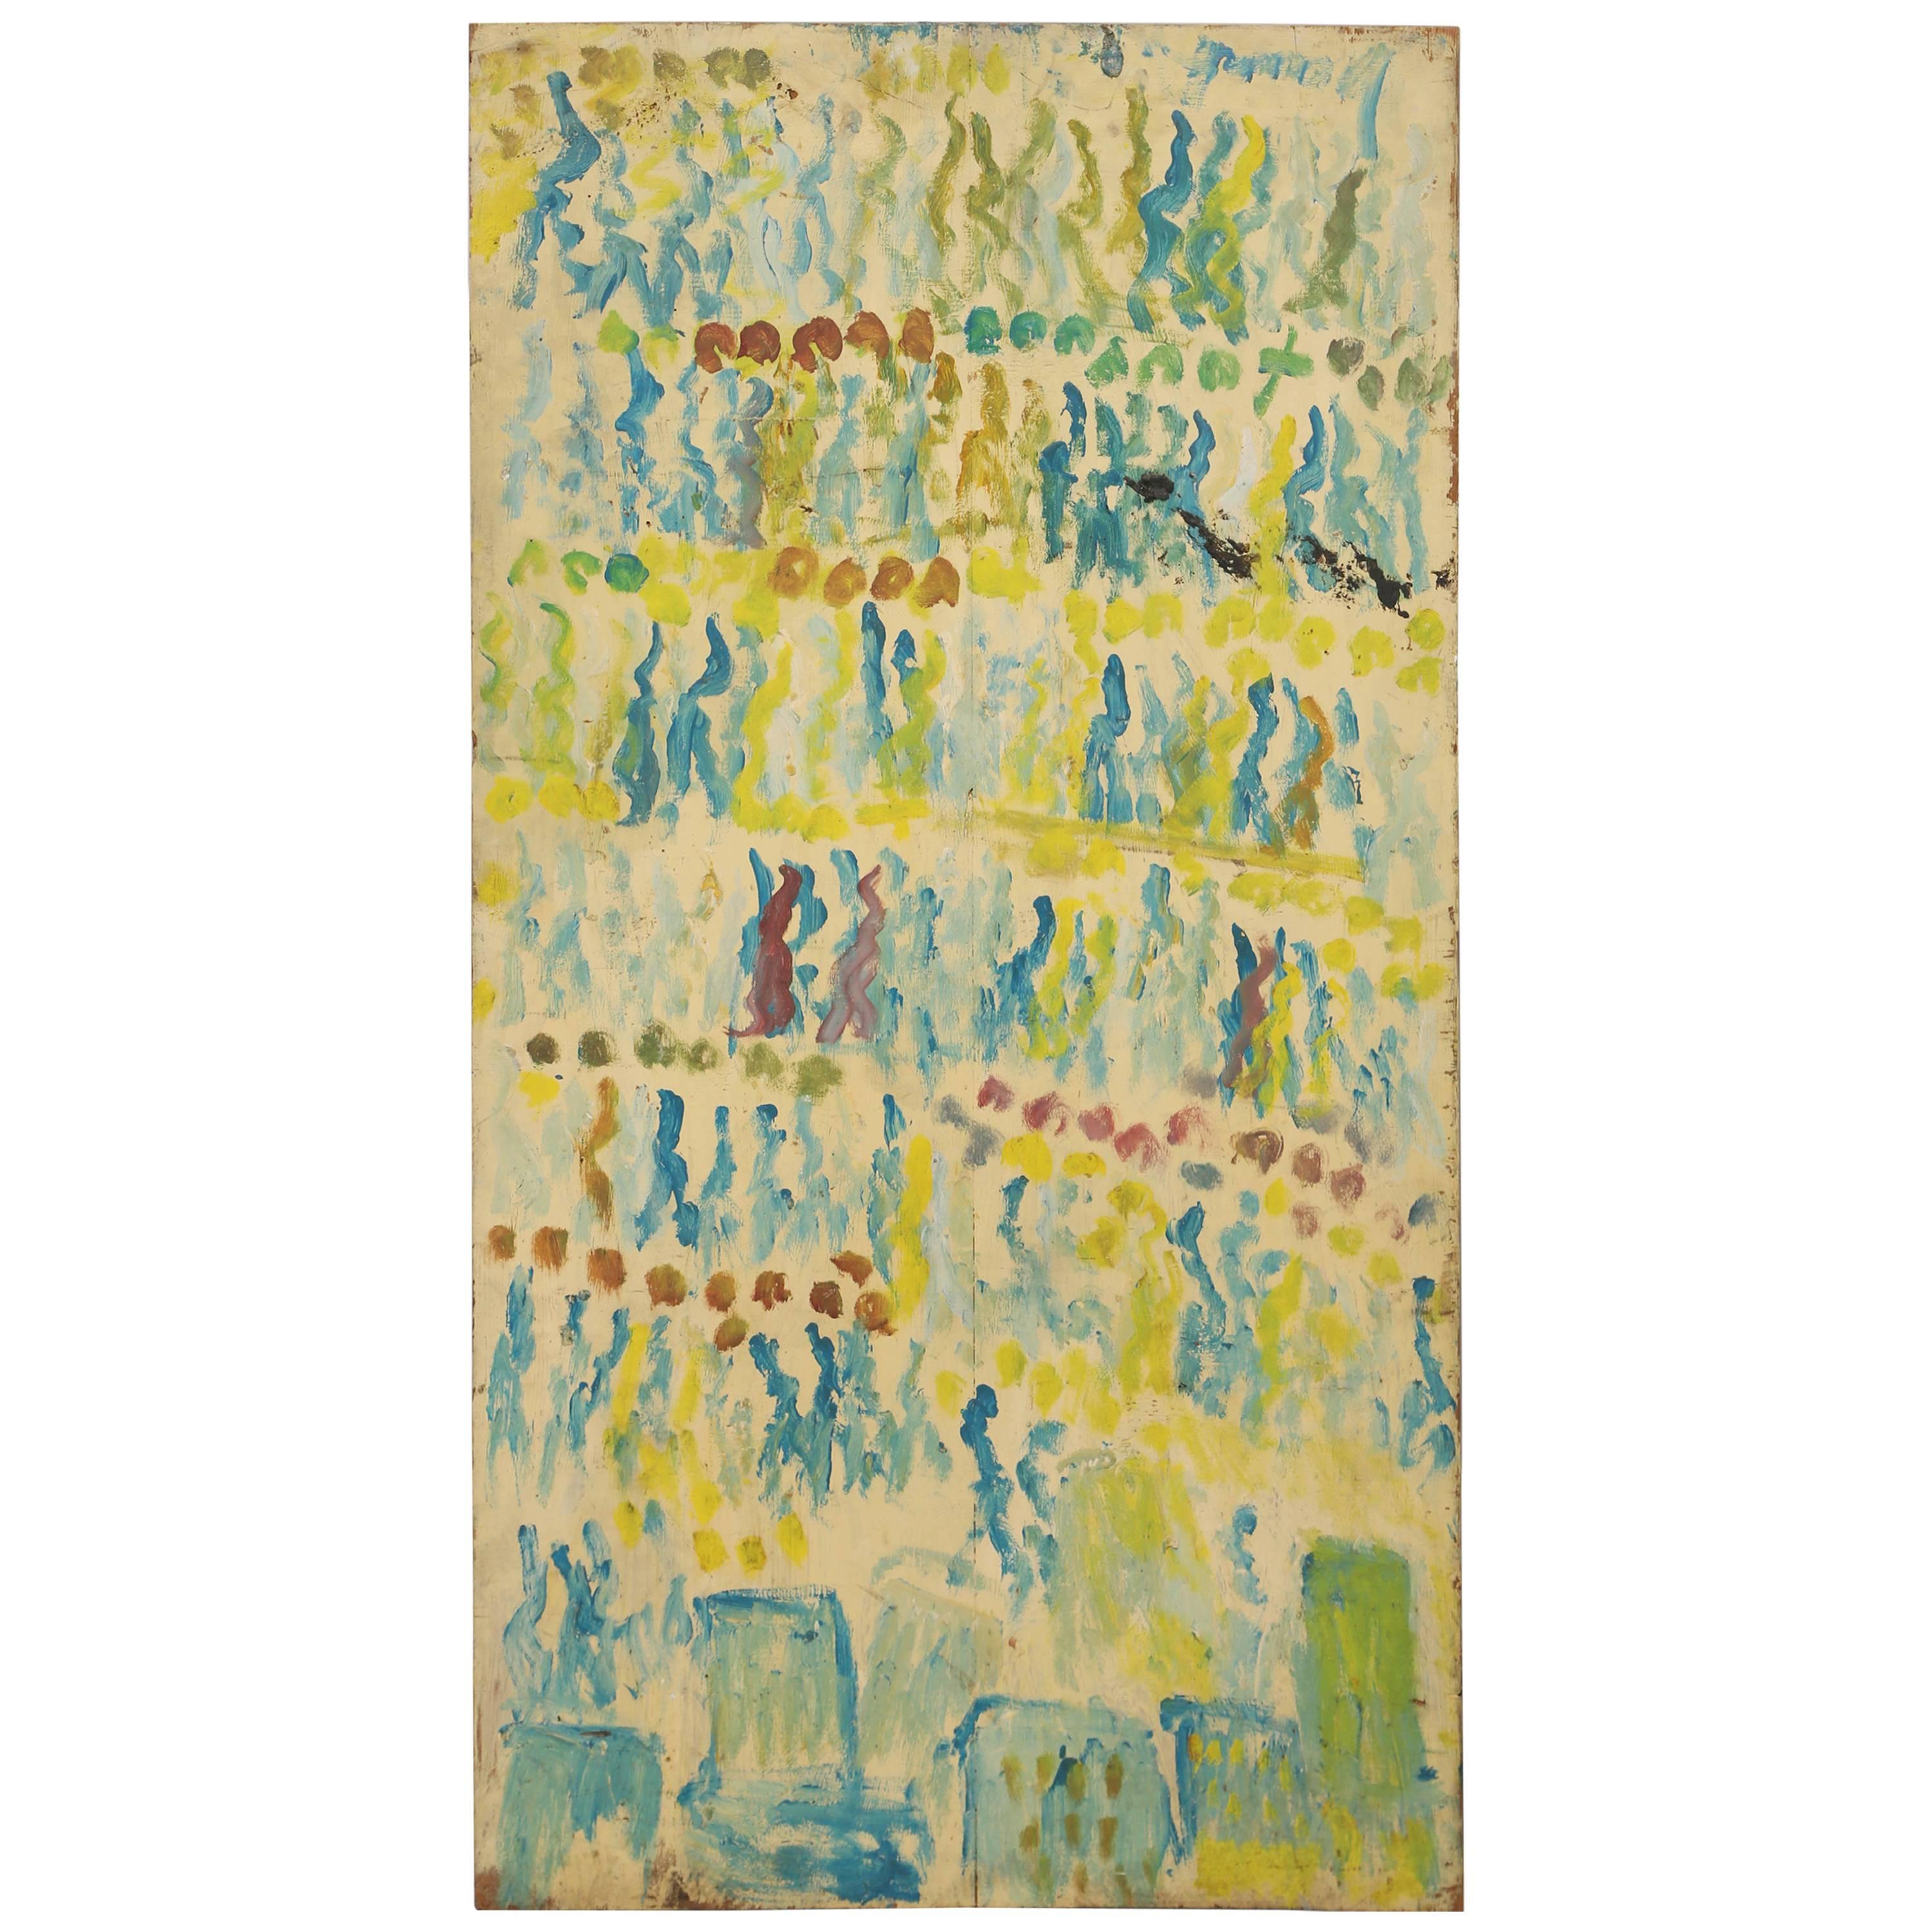 Purvis Young "Rows of People." on Wood Abstract, Green on Green